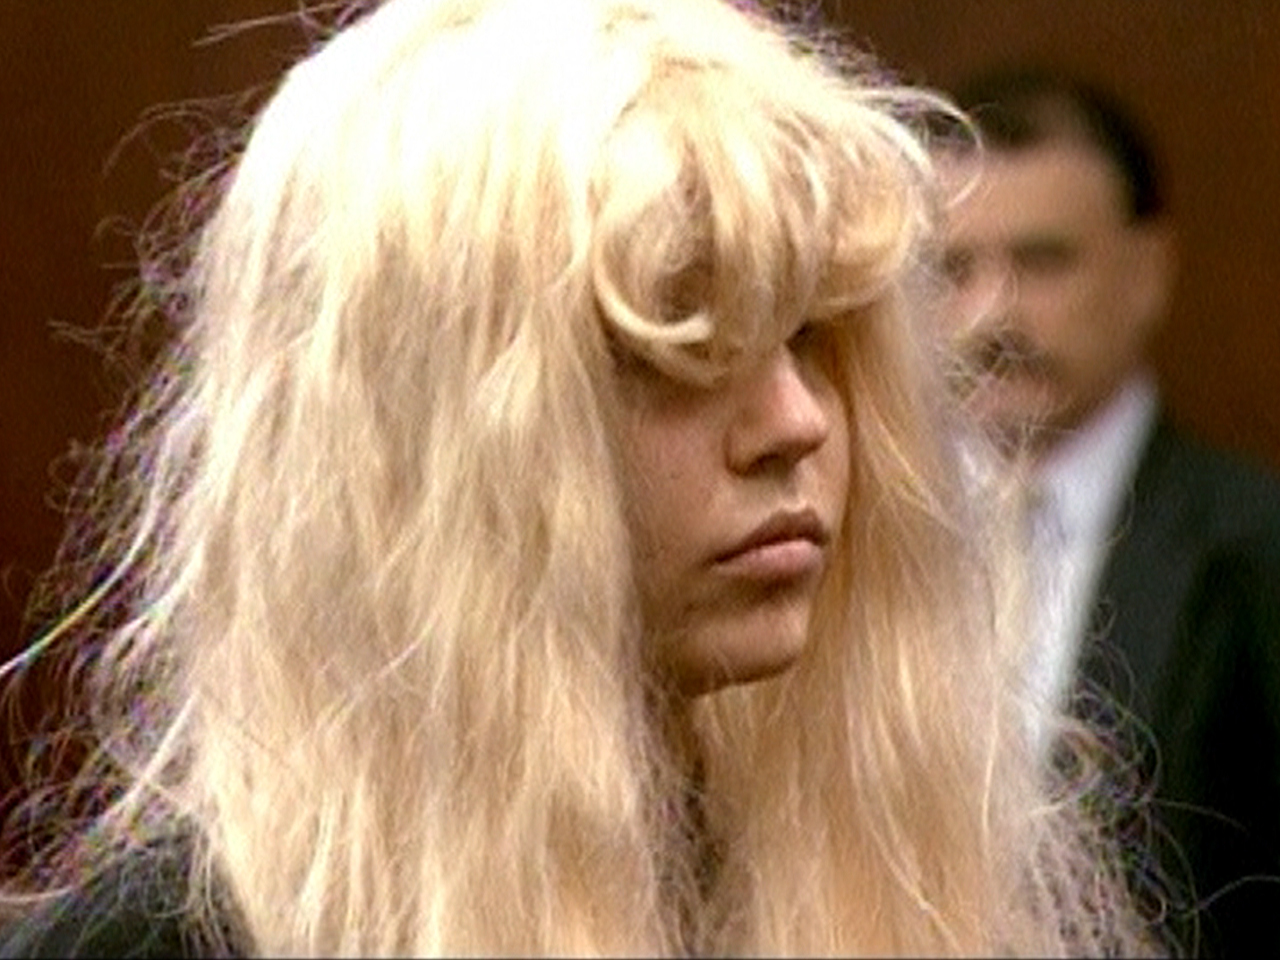 Amanda Bynes shows up to court in blonde wig - TODAY.com1280 x 960